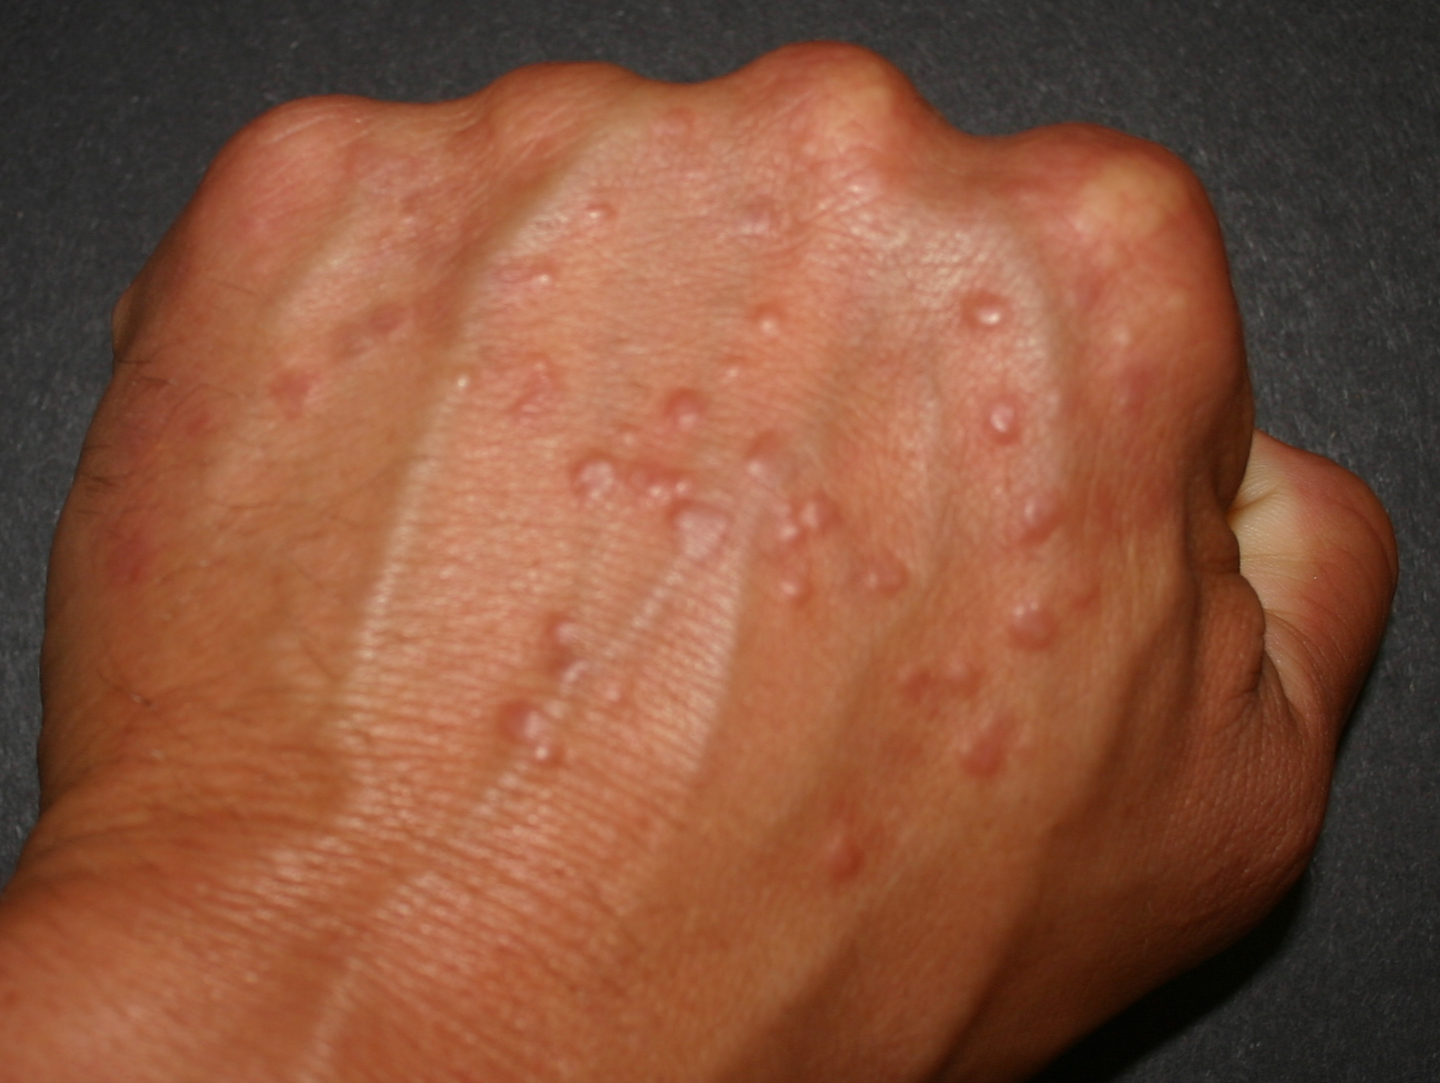 pictures of rashes on adults #11